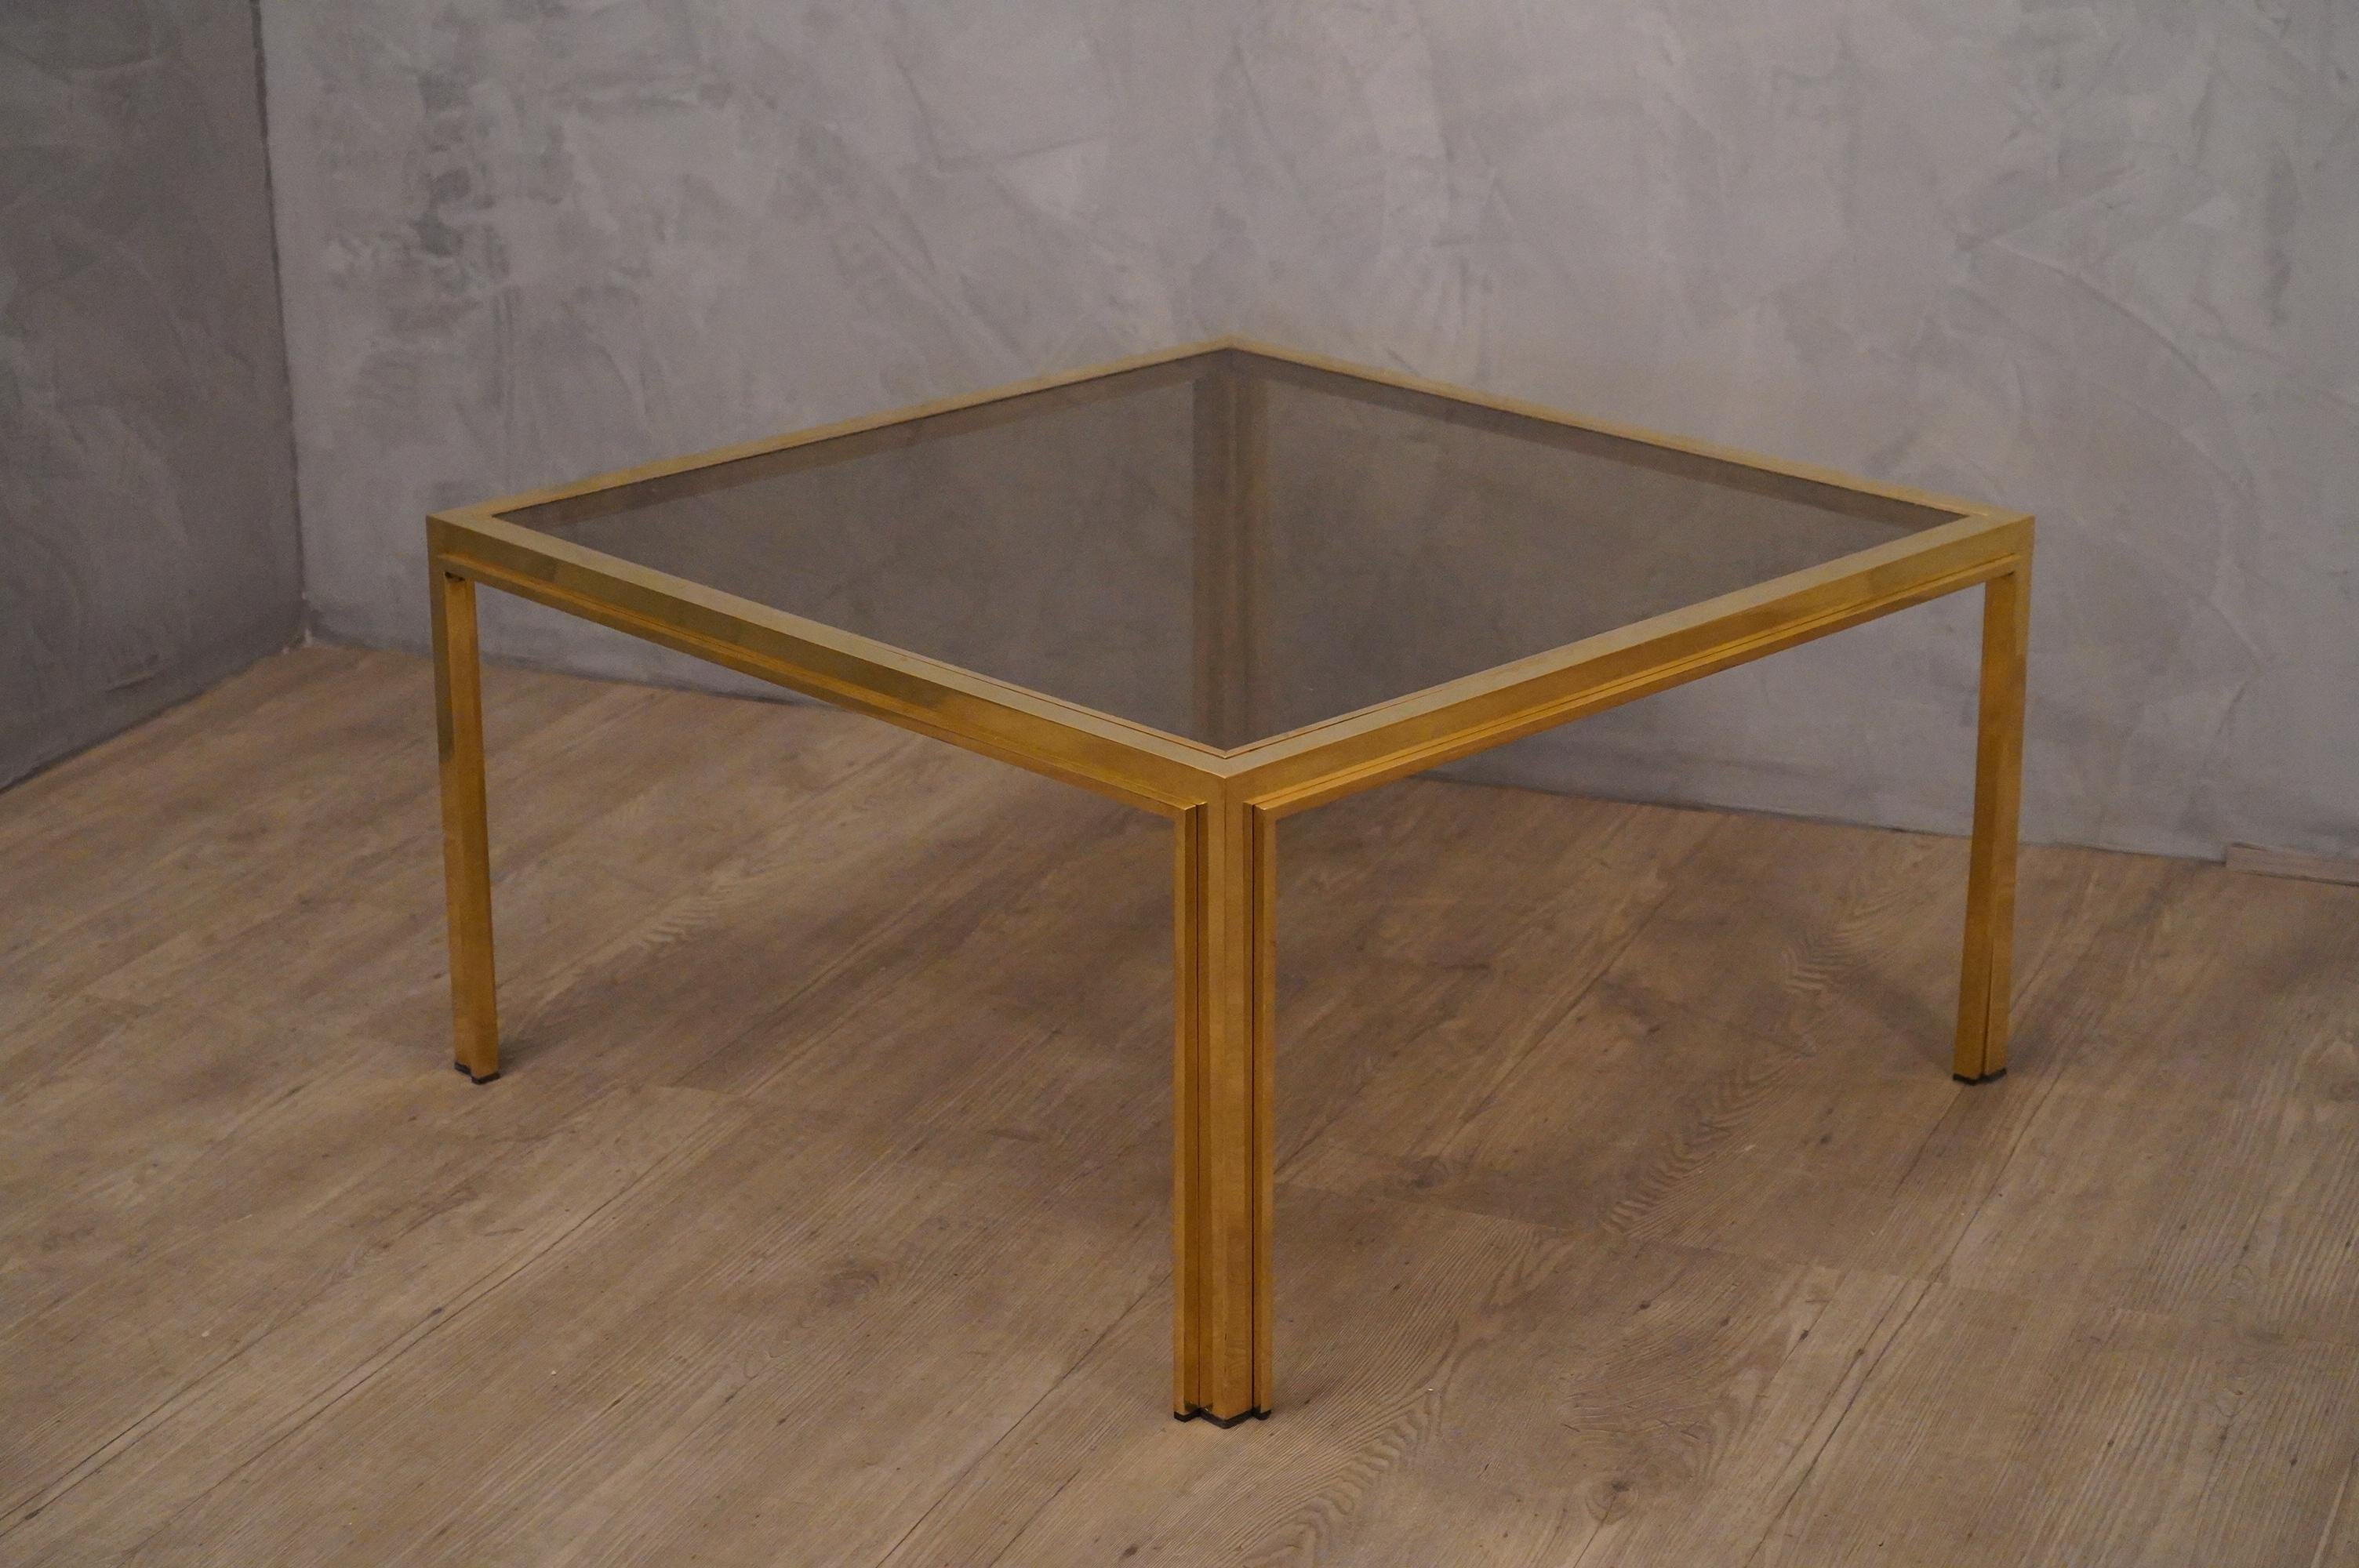 Romeo Rega Midcentury Square Brass and Glass Sofa Table, 1970 For Sale 7